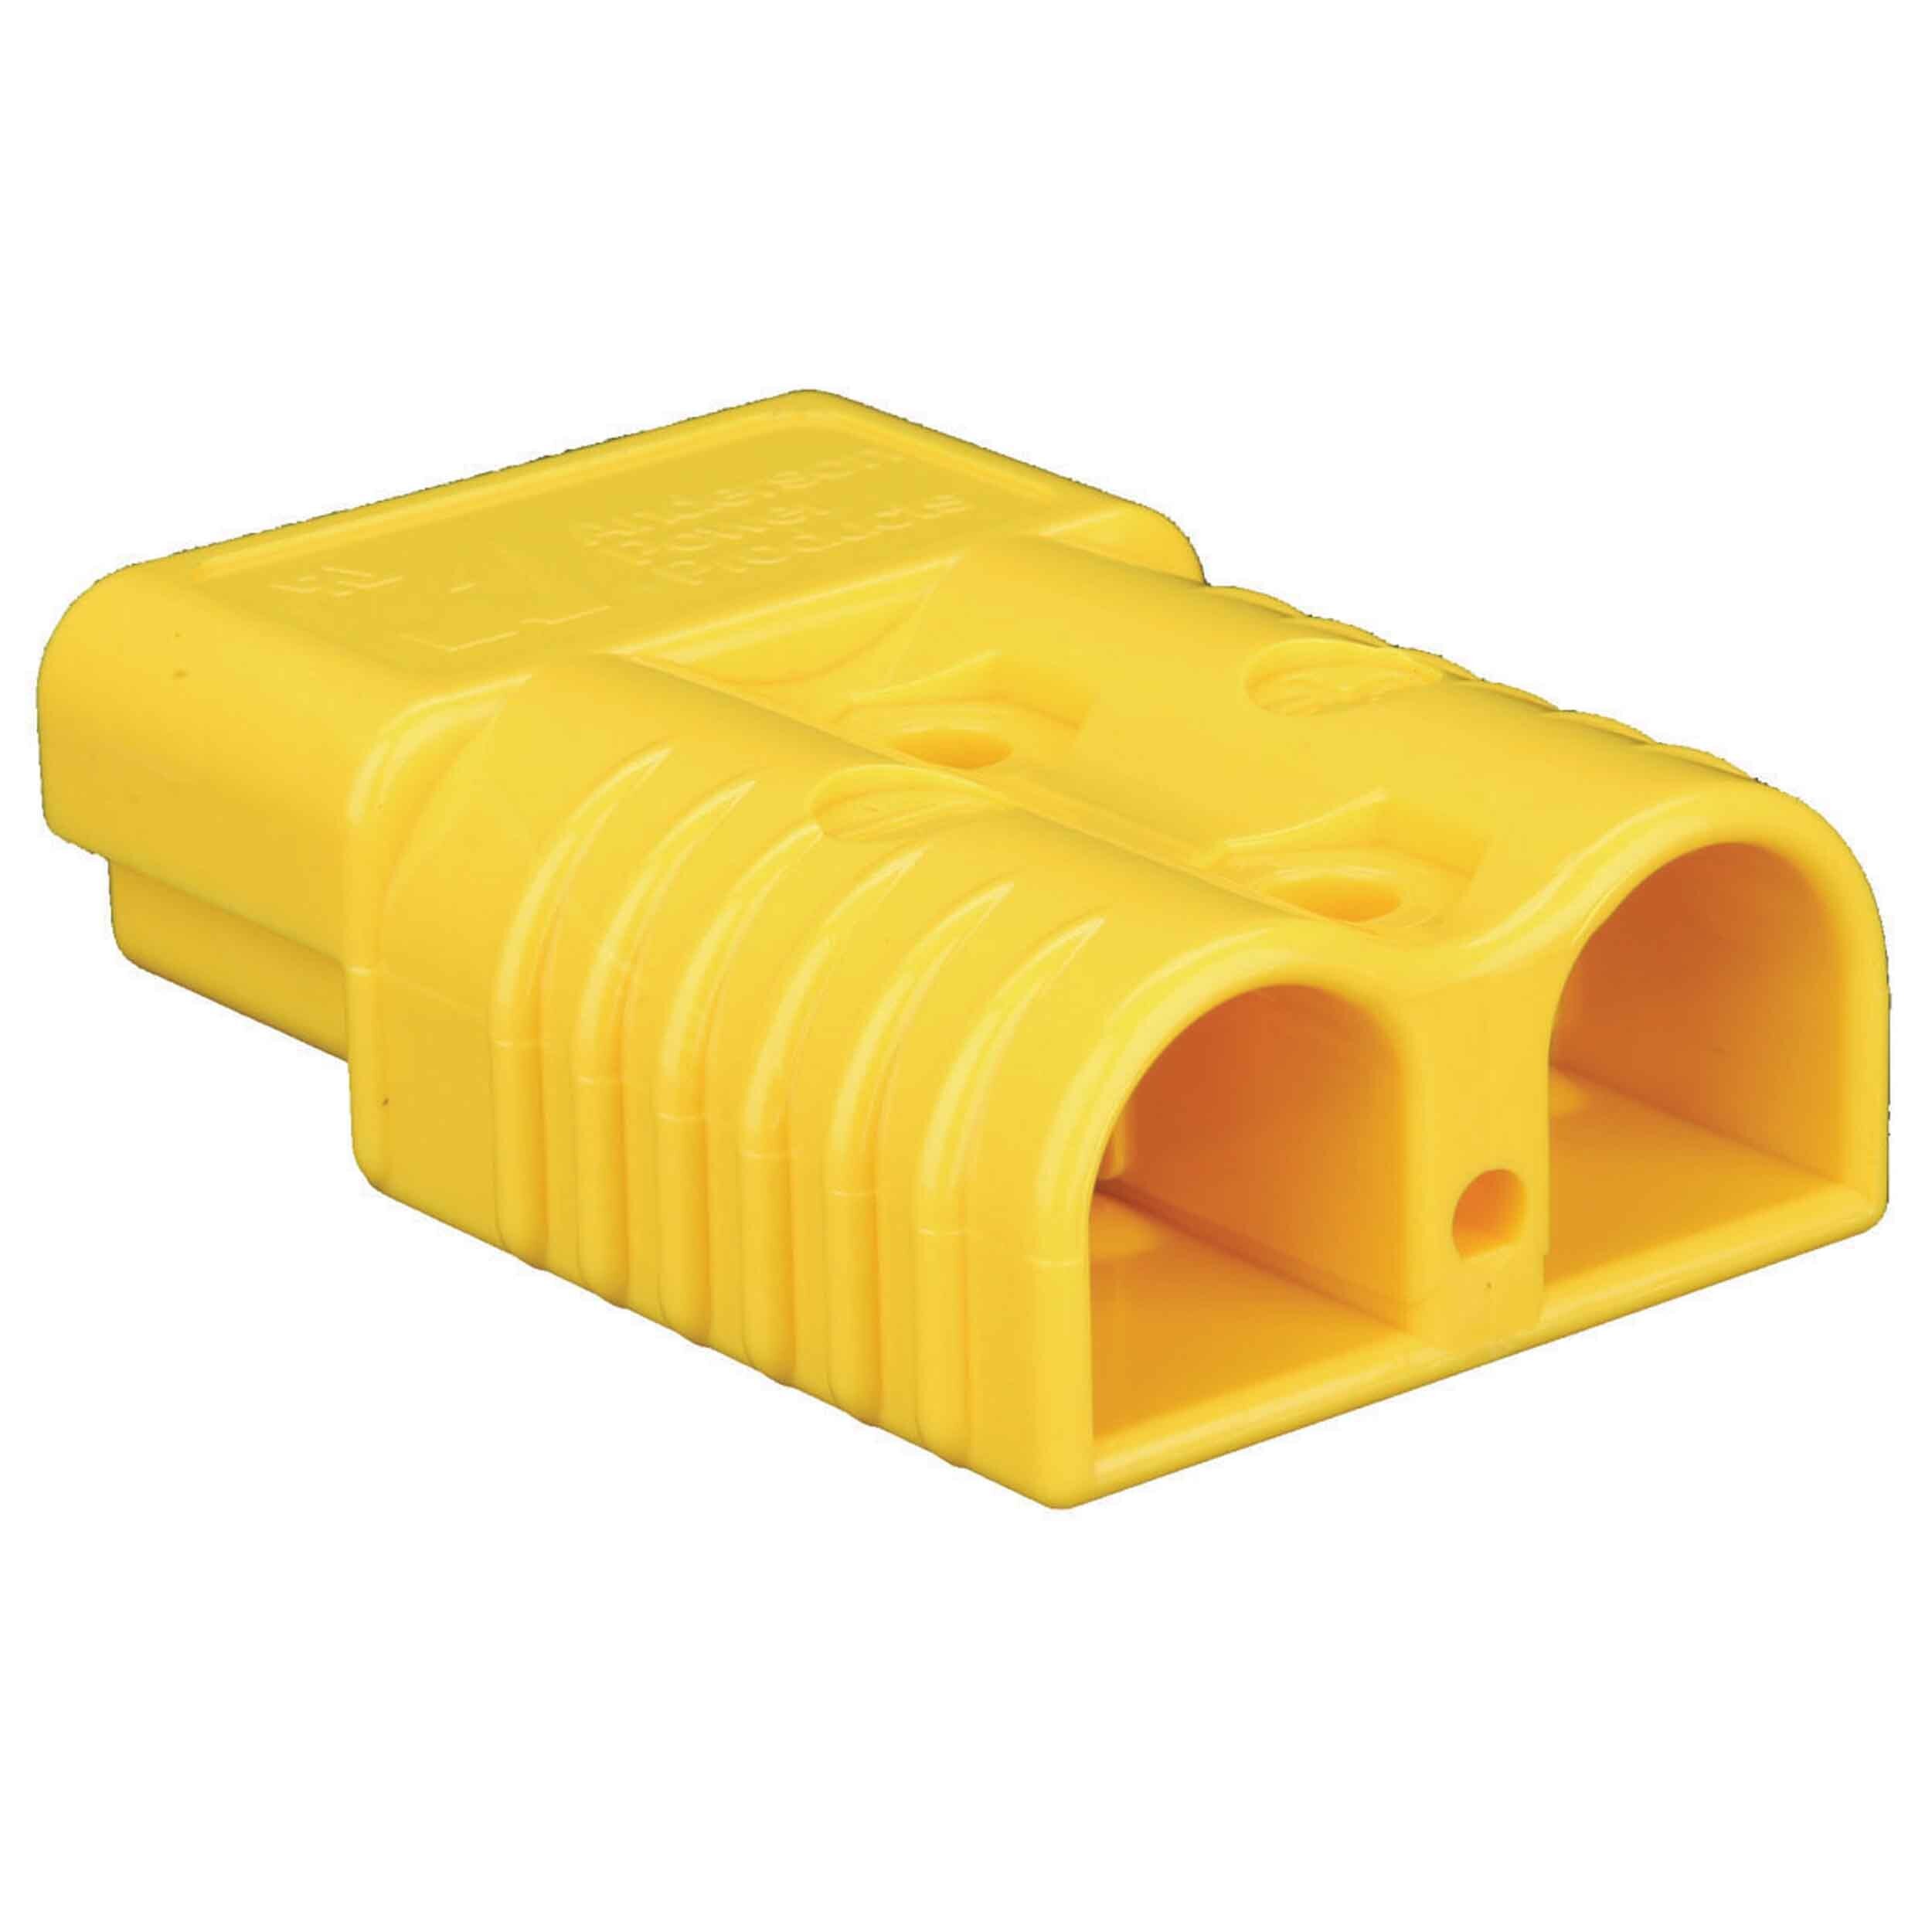 Anderson Connector Yellow 1 Gauge  Each